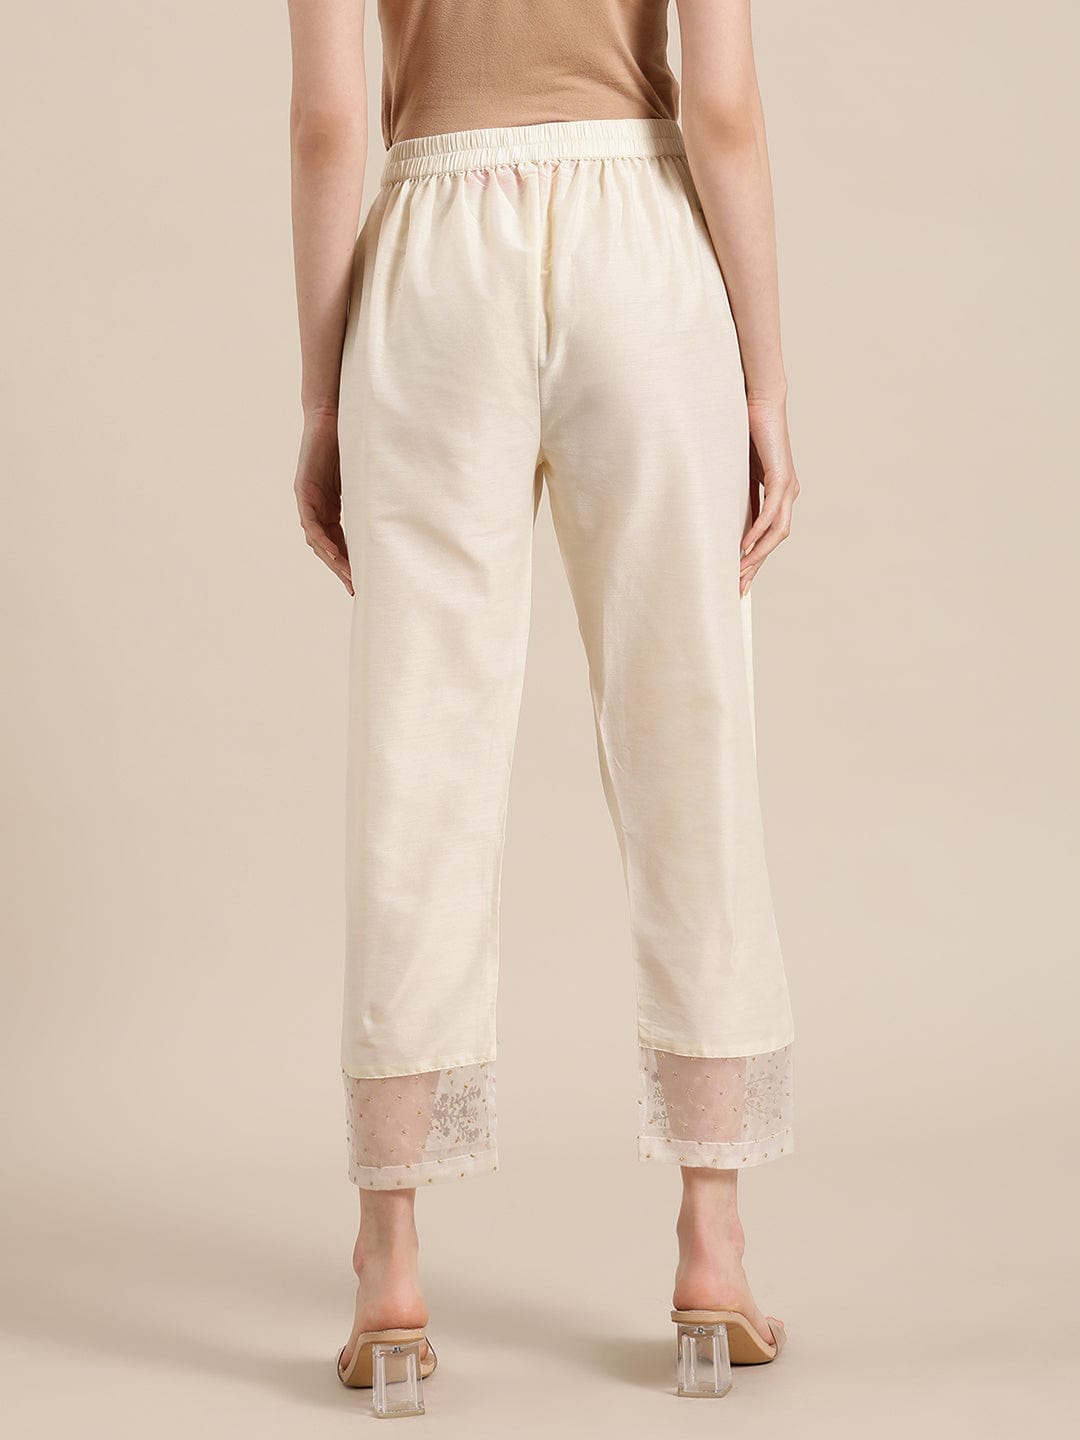 Buy Offwhite Trousers  Pants for Women by Clora Creation Online  Ajiocom